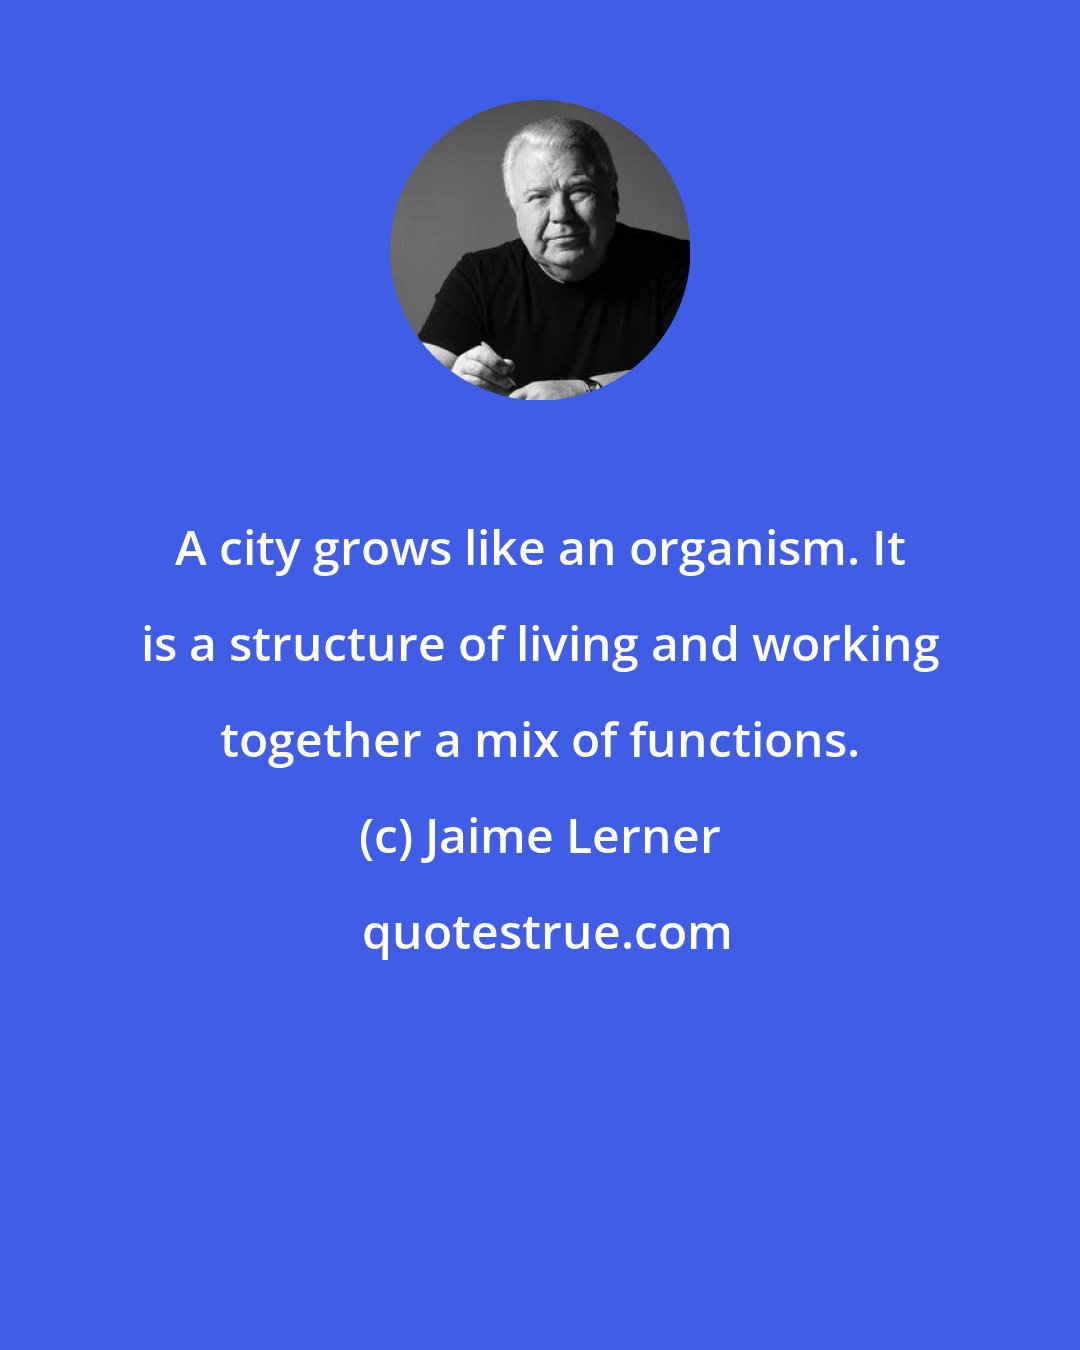 Jaime Lerner: A city grows like an organism. It is a structure of living and working together a mix of functions.